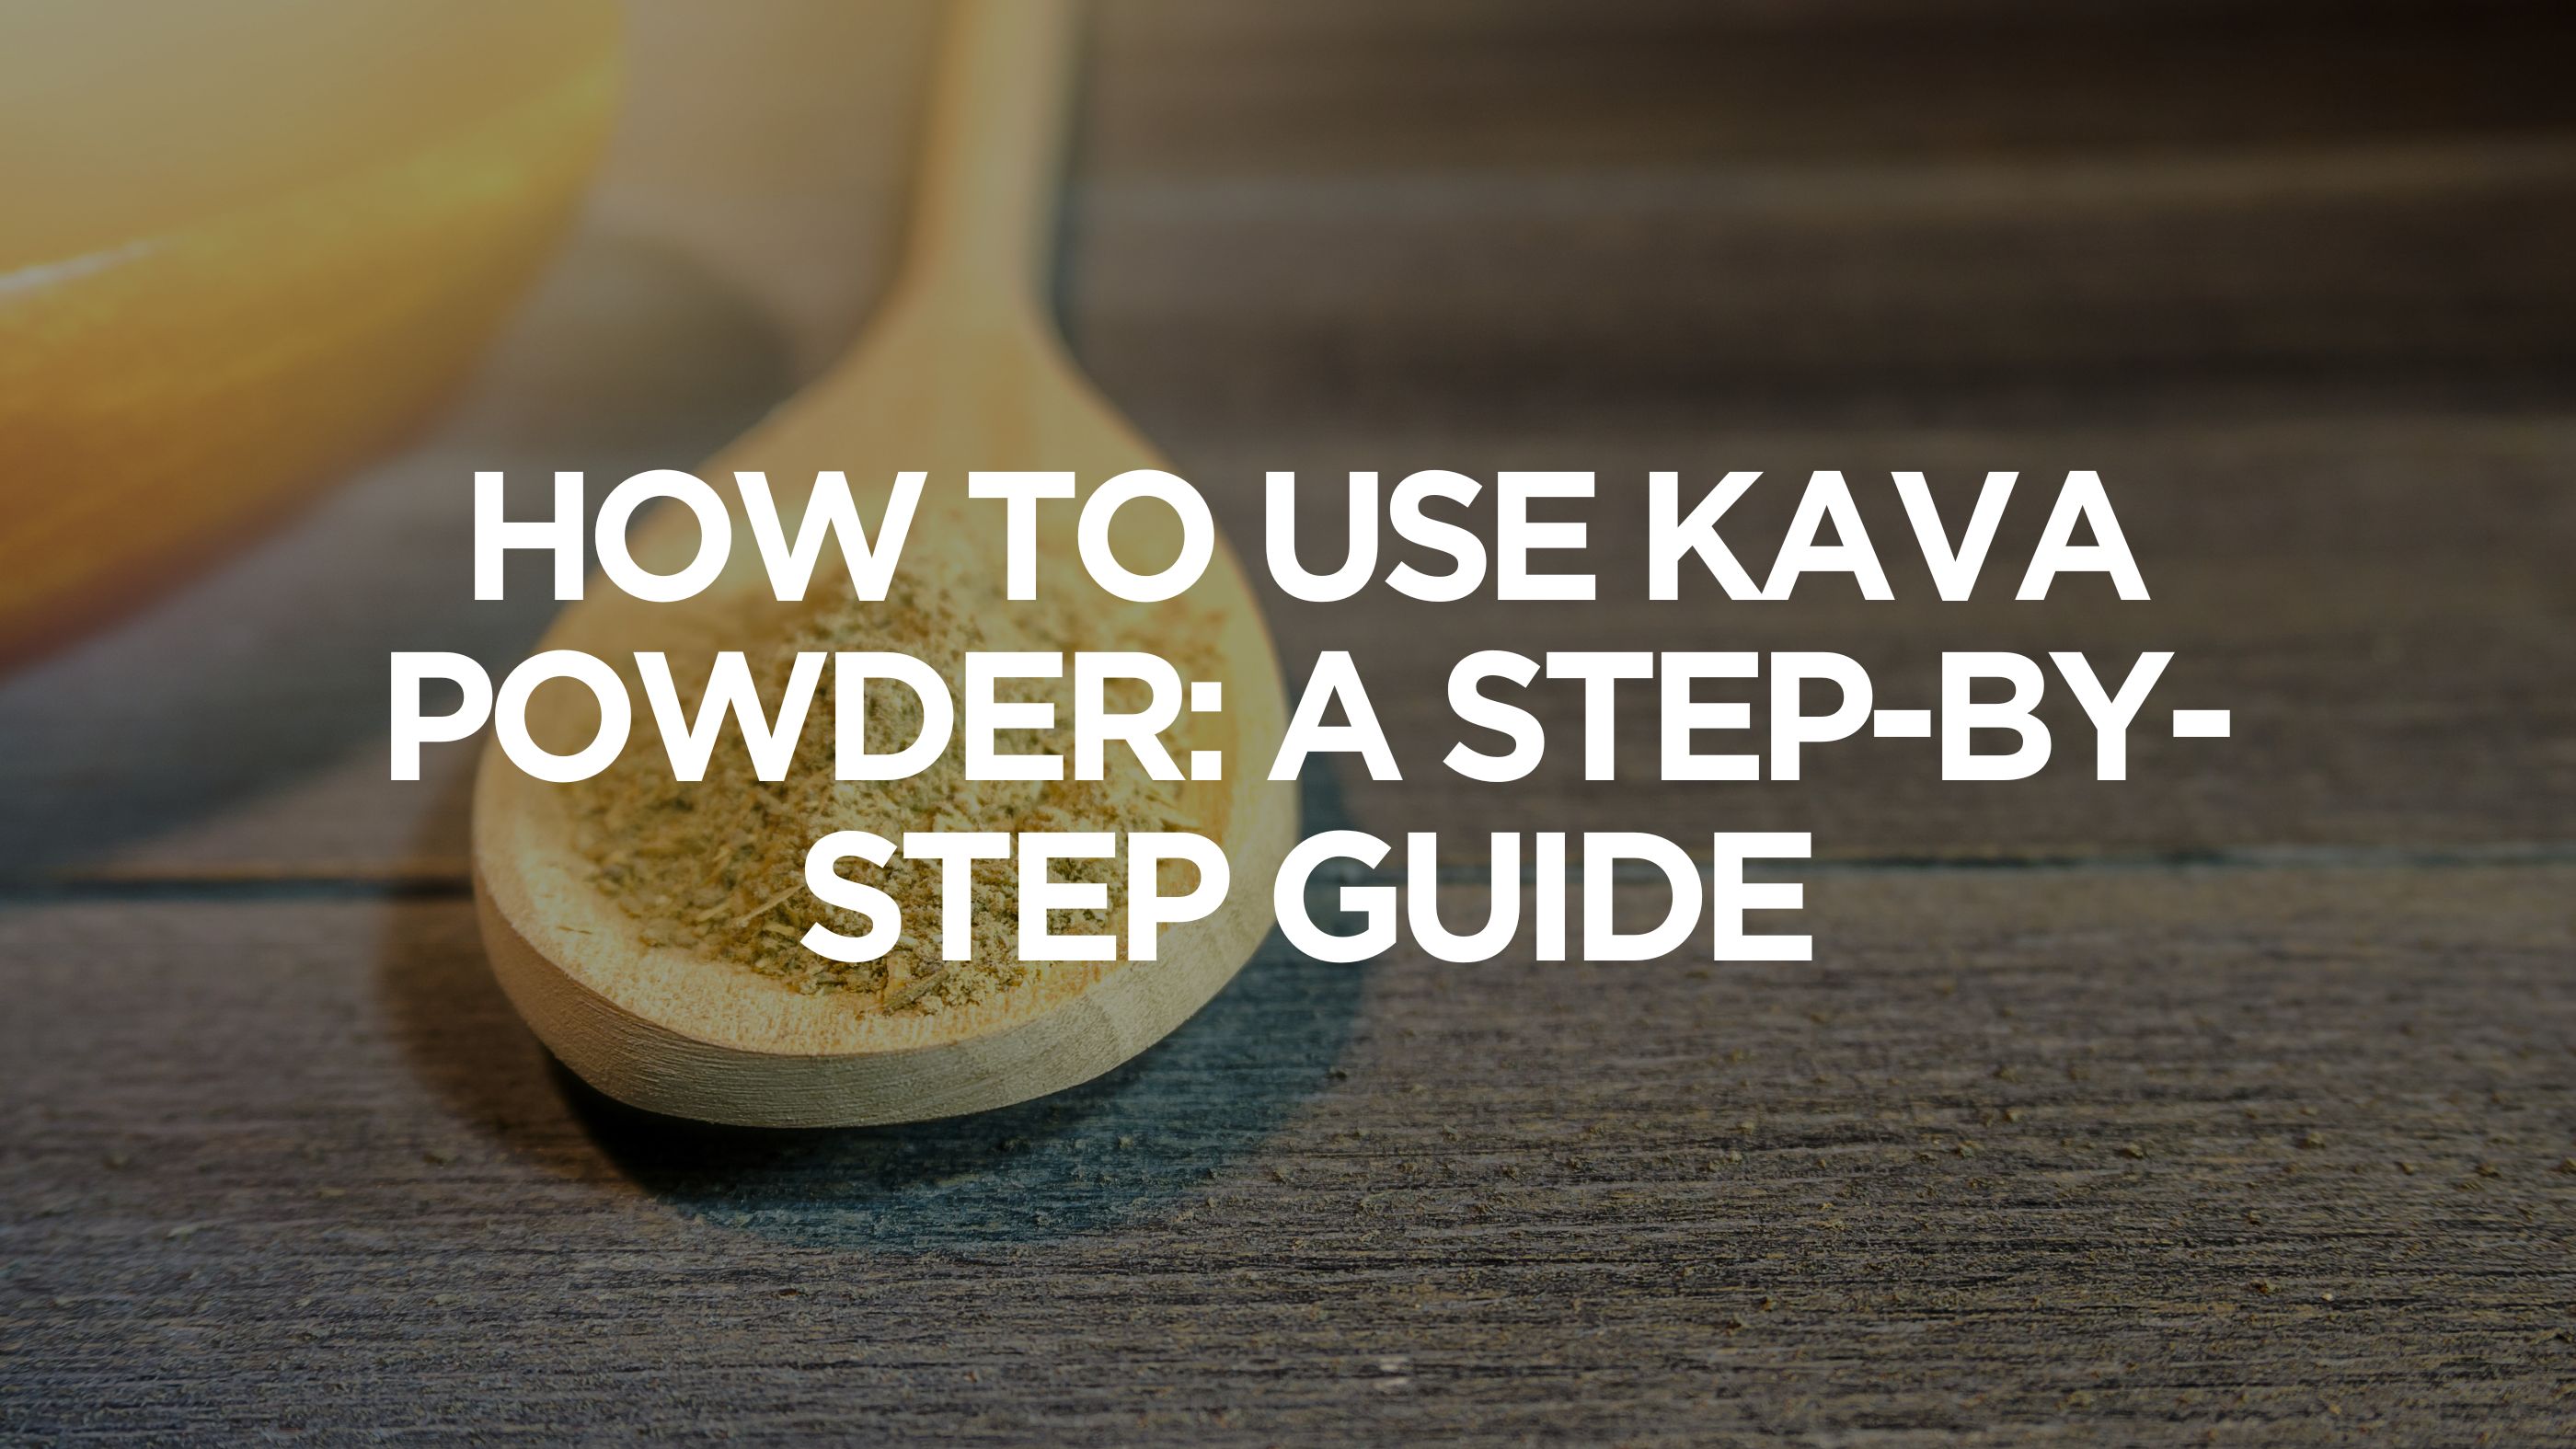 How to Use Kava Powder: A Step-by-Step Guide